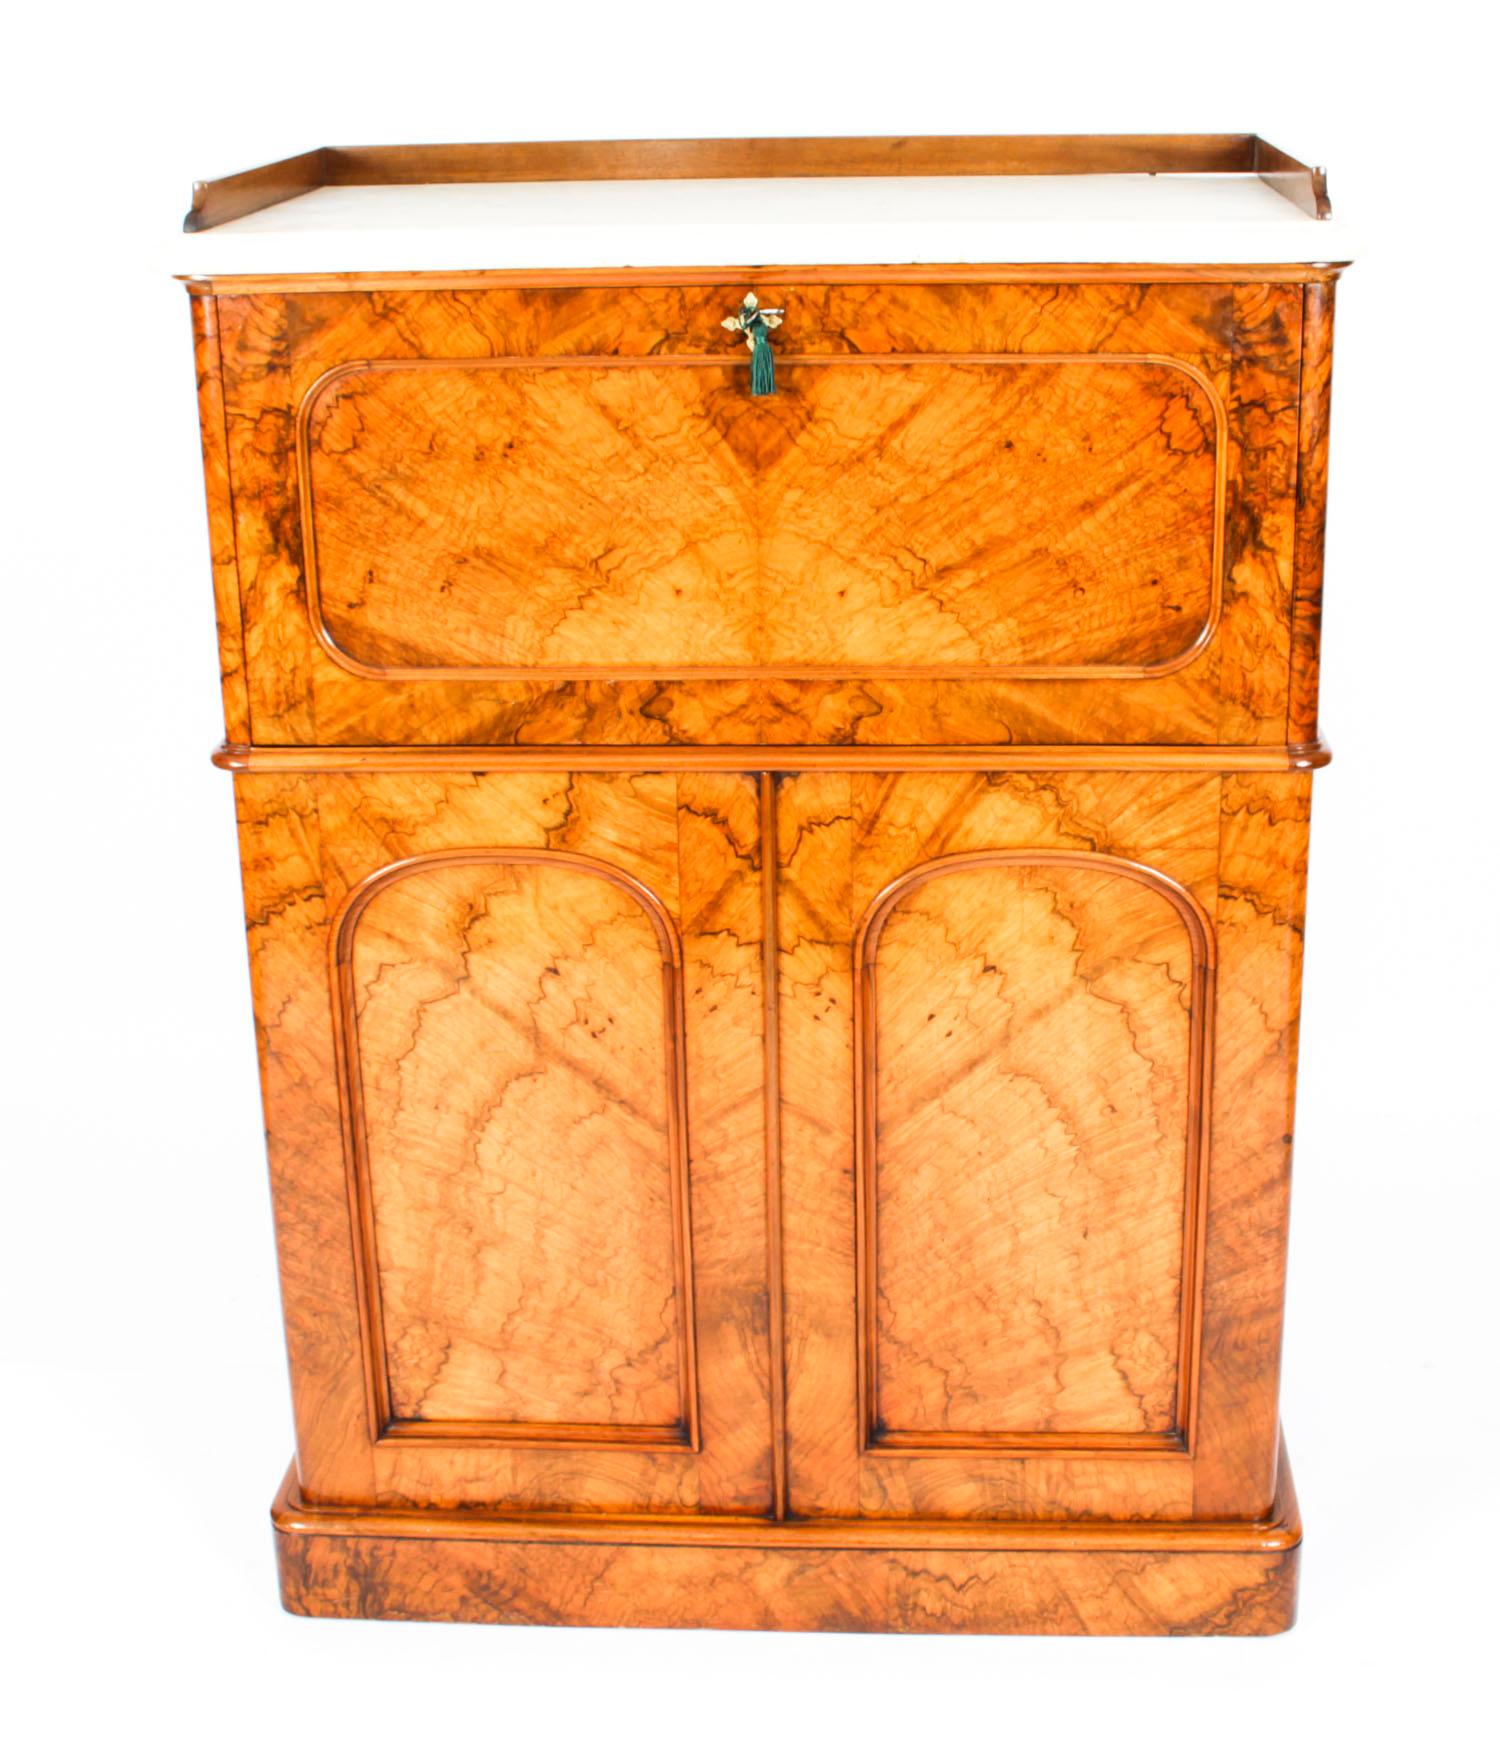 This is a superb quality antique Victorian burr walnut collectors cabinet, circa 1860 in date.
 
The entire piece highlights the unique and truly exceptional pattern and colour of the burr walnut extremely well.
 
The cabinet features a white